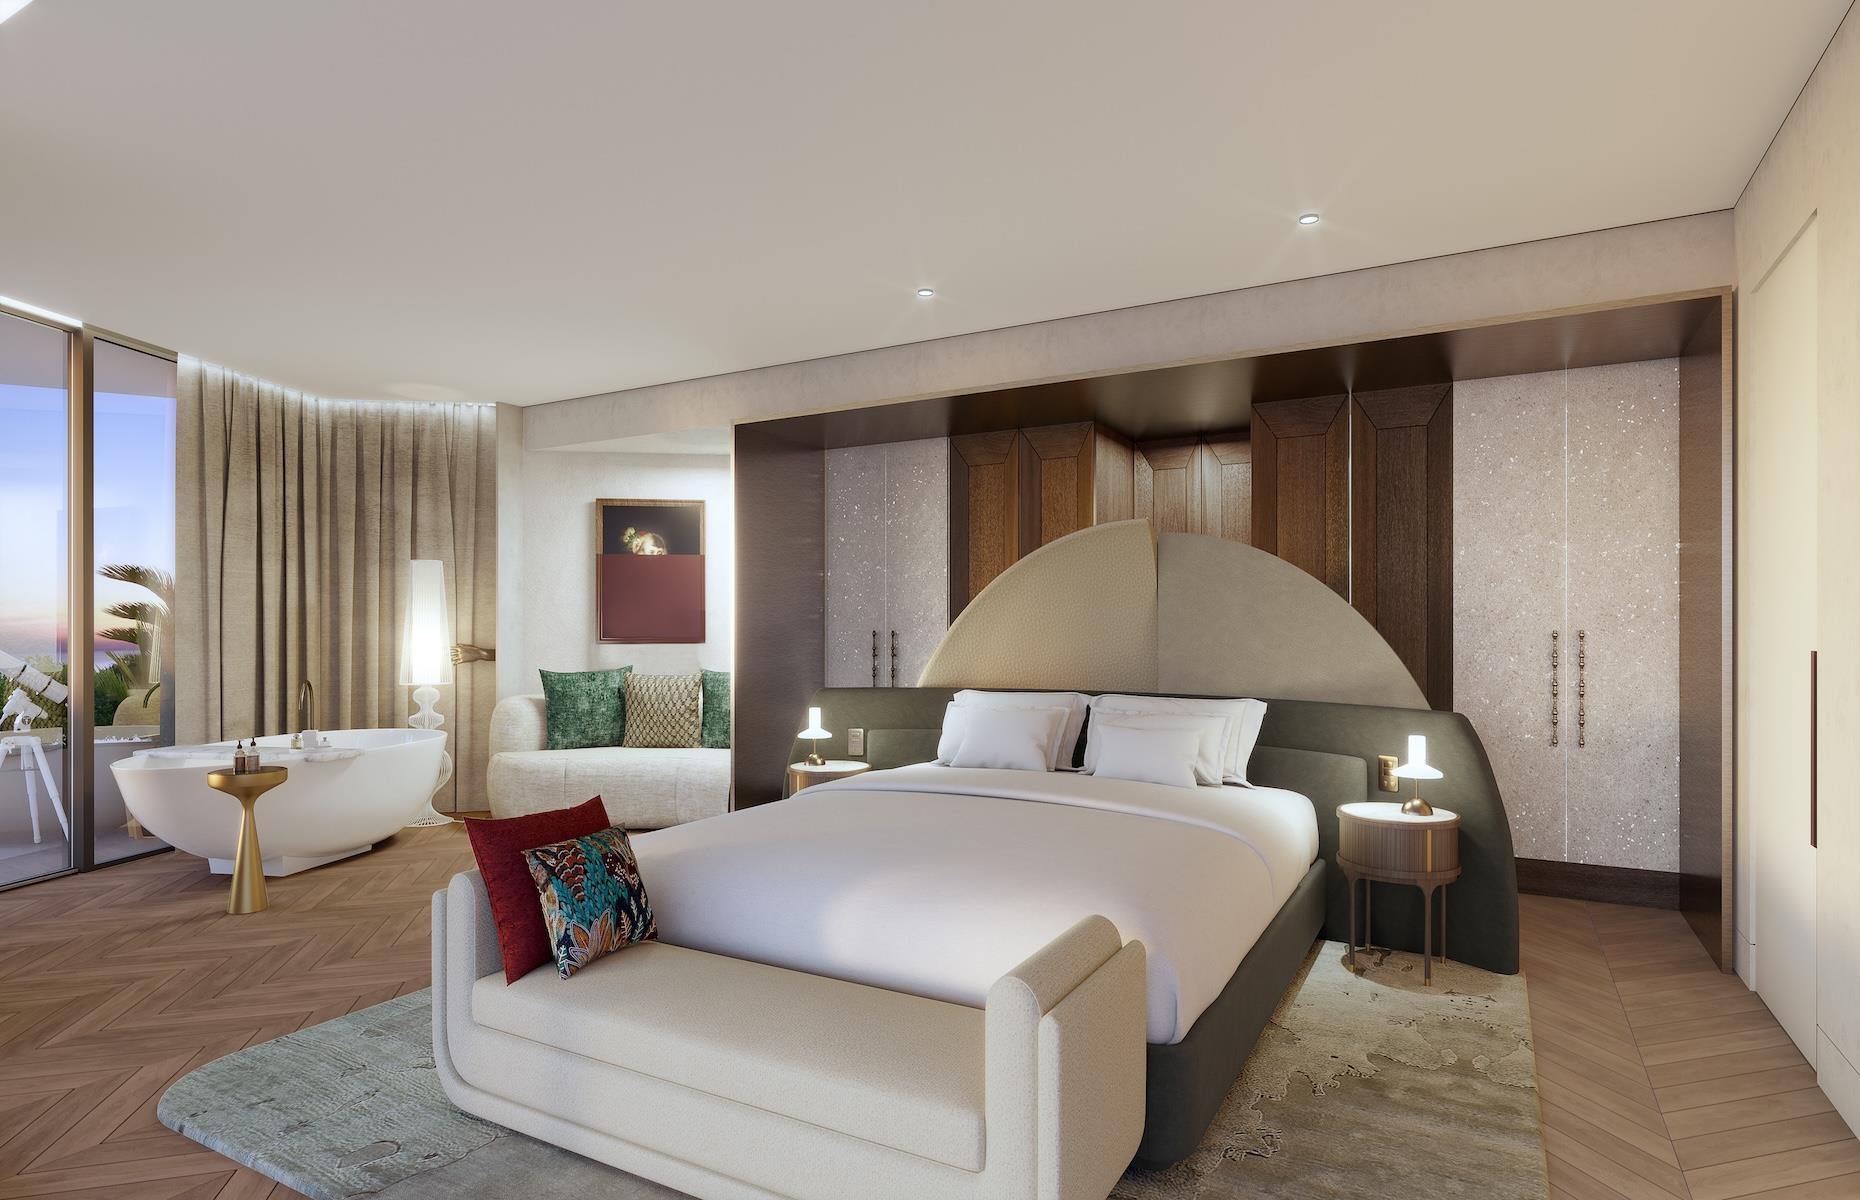 <p>It’s not surprising that hotel group Ennismore has set its sights on Barcelona’s hip 22@ district for the first European outpost of its SLS brand. Slated to open in the revitalized old industrial area of Poblenou in the second half of 2024, the striking 471-room SLS Barcelona will combine SLS’s signature cool and cheeky style with seaside Med vibes. Water views are a given as each room will have a balcony and there will be three pools and two restaurants. The large rooftop sky bar and a spa will be a high point, as will direct access to the beach.  </p>